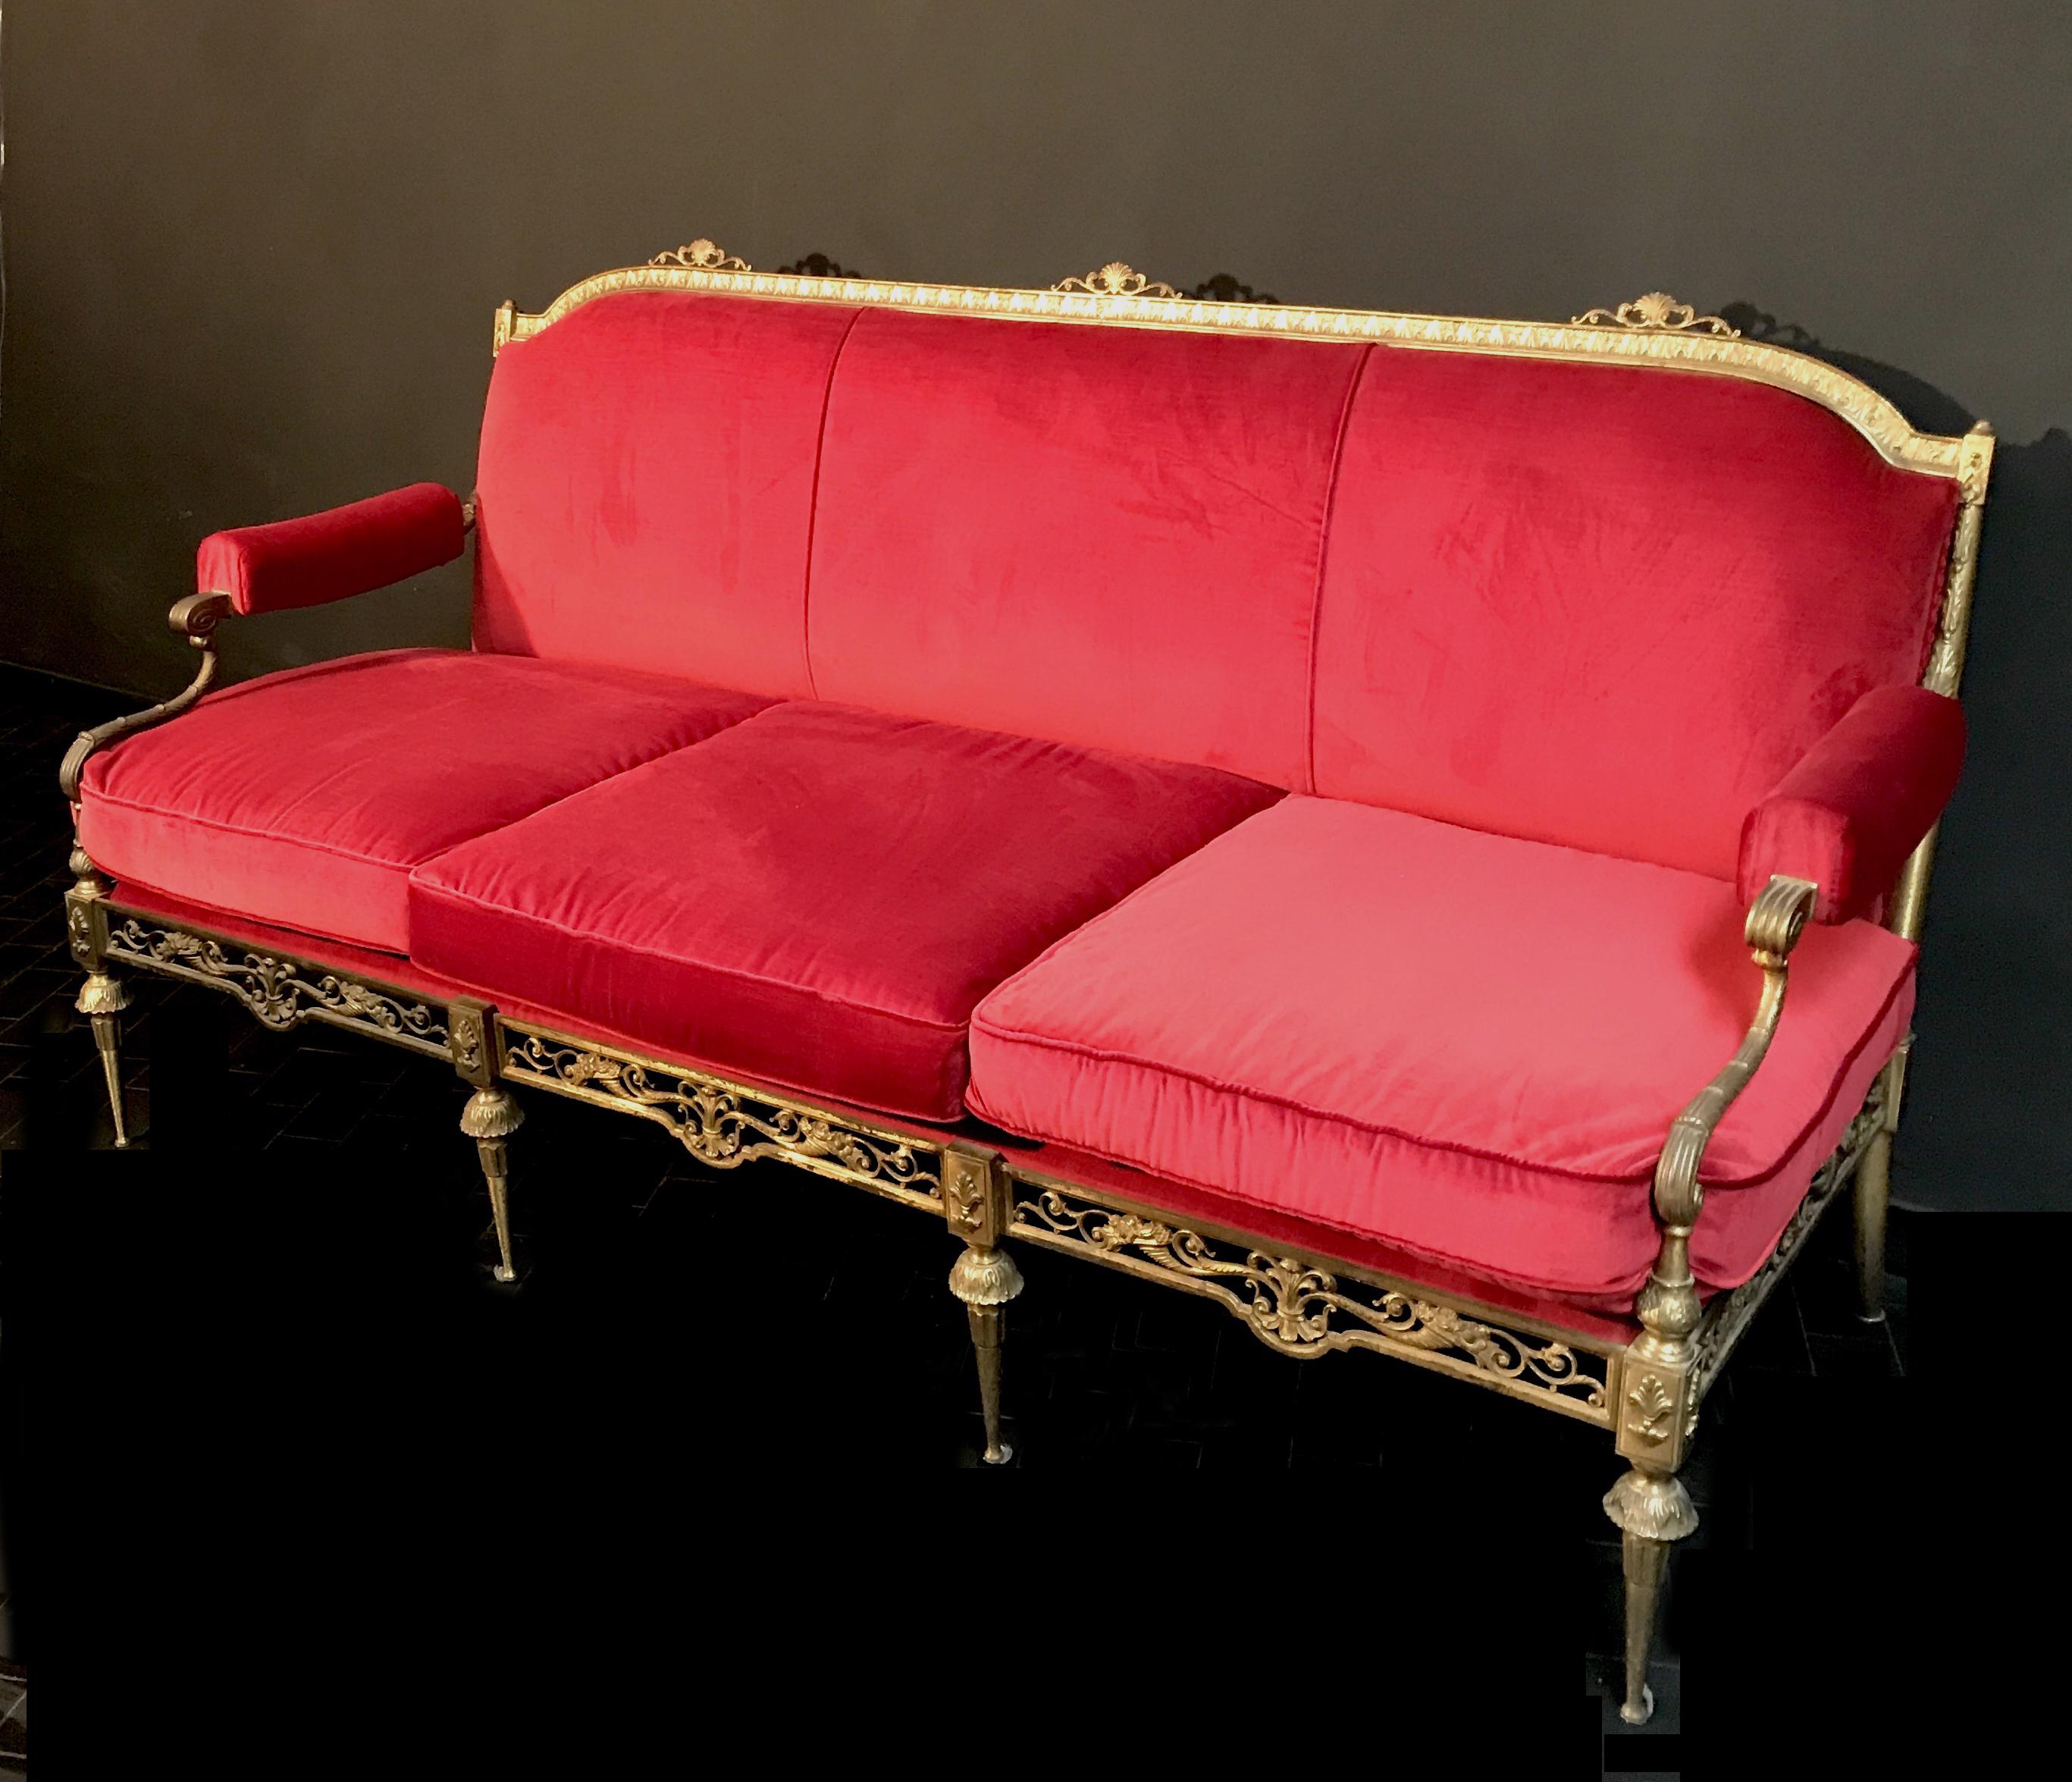 Exceptional pair of gilt bronze living room set with a pair of armchairs and elegant sofa.
Amazing red velvet upholstery in perfect condition.
Thrilling Provenance will be revealed to the buyer.

 